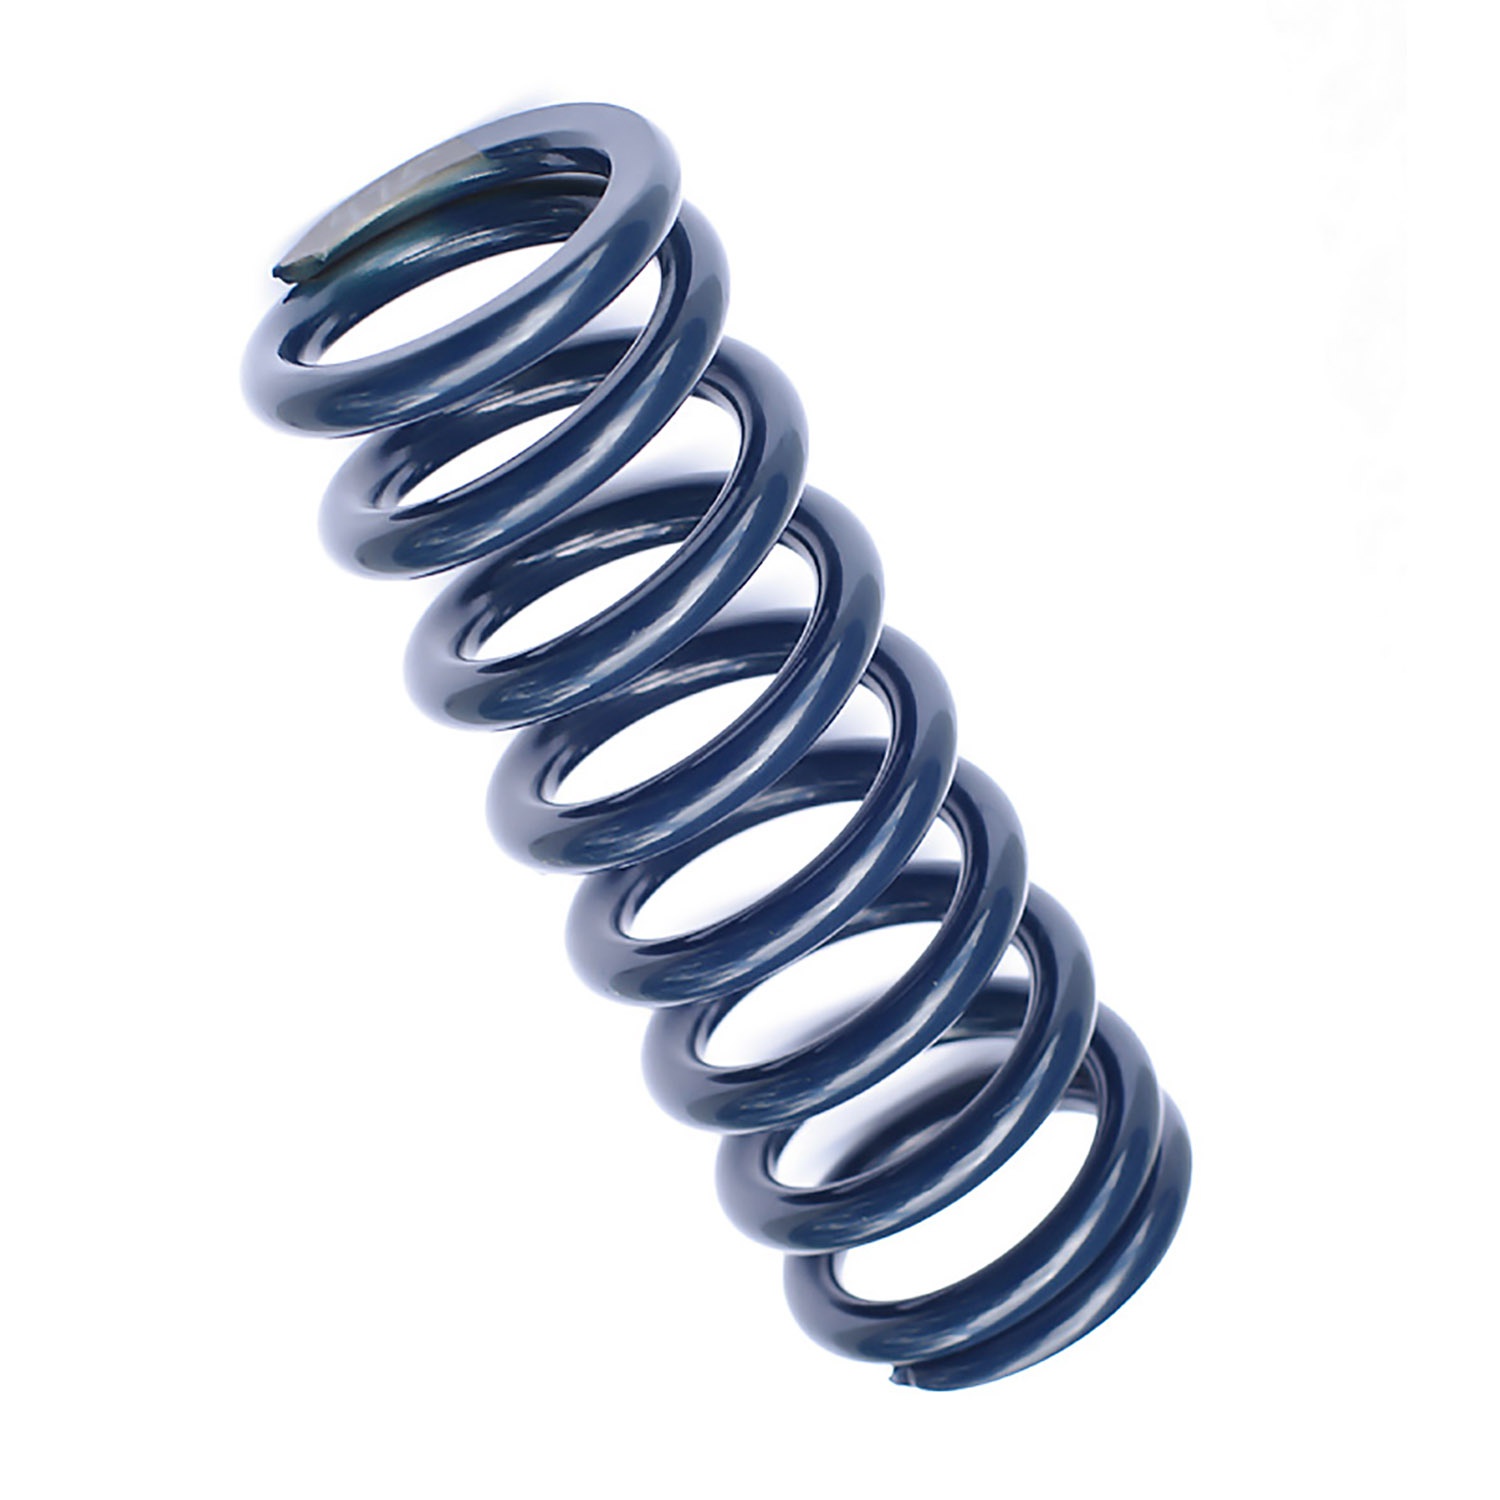 Coil Over Spring 1800-250-0250  18" x 2.5" x 250 lbs Sold Individually